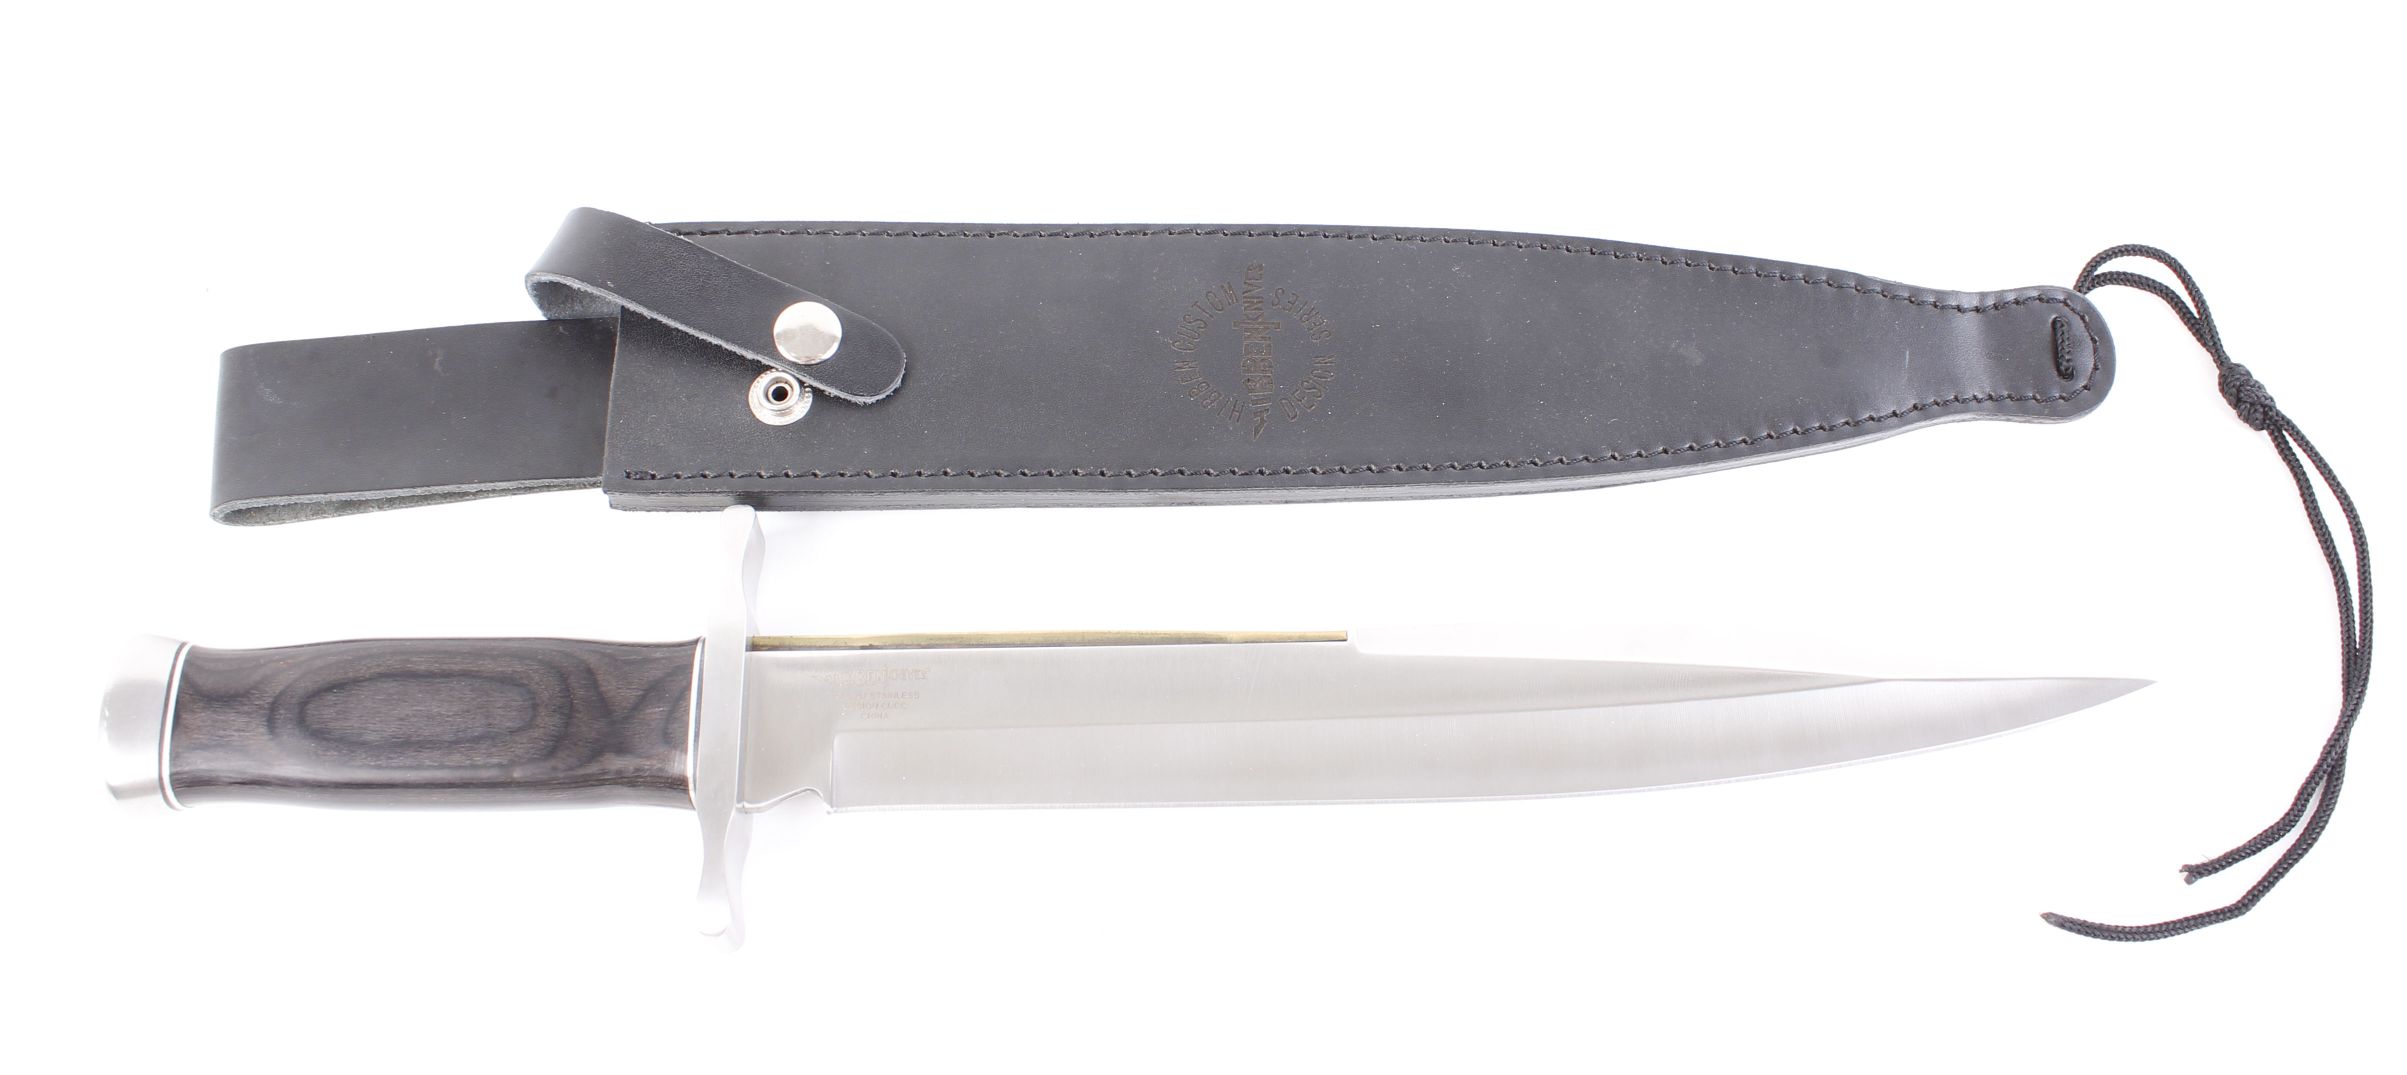 Hibben Custom sheath knife, 12 ins double edged stainless steel blade with inset brass ridge, - Image 2 of 4